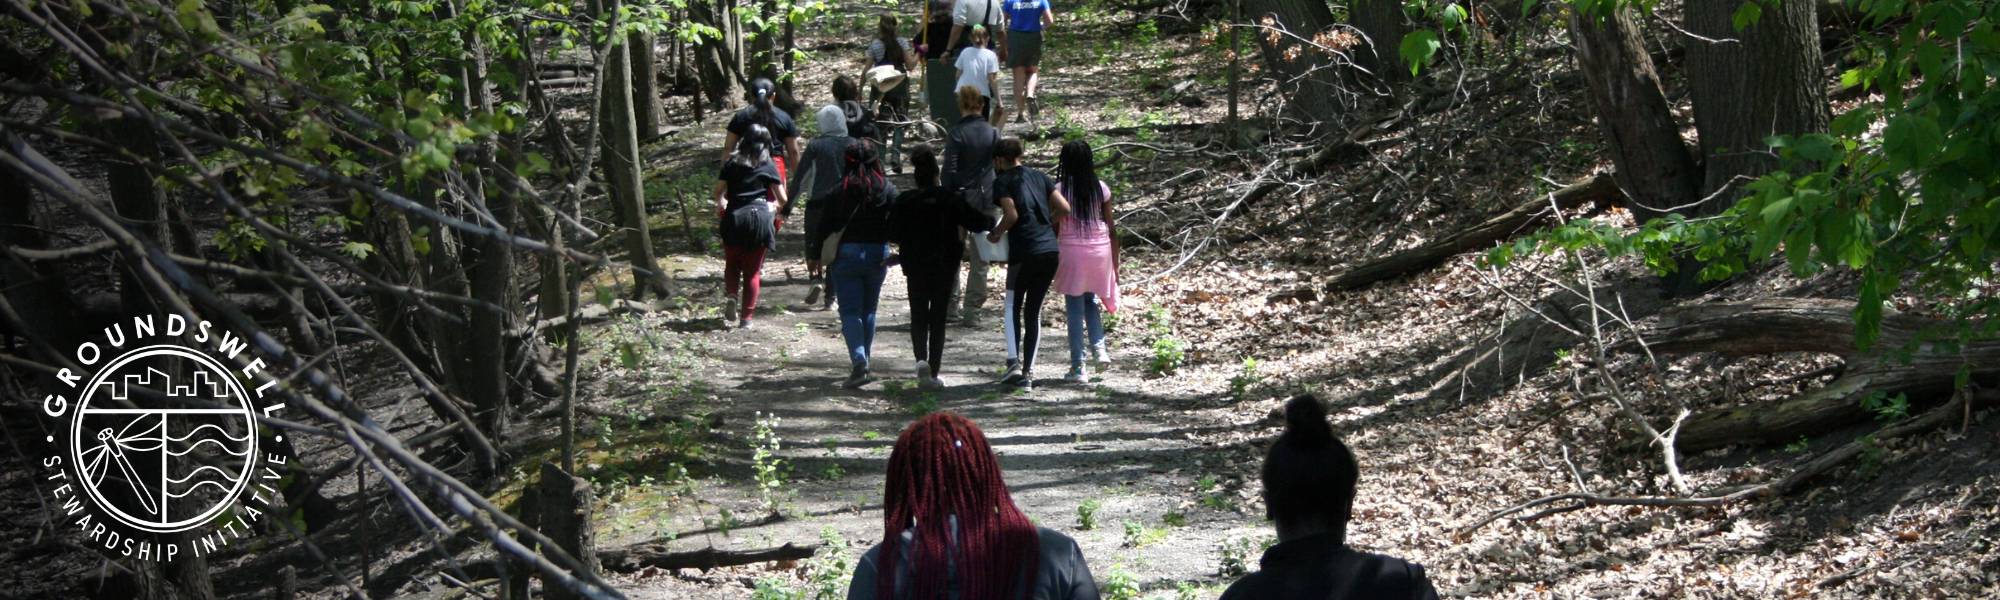 Students walking on a trail in the woods, sunny day